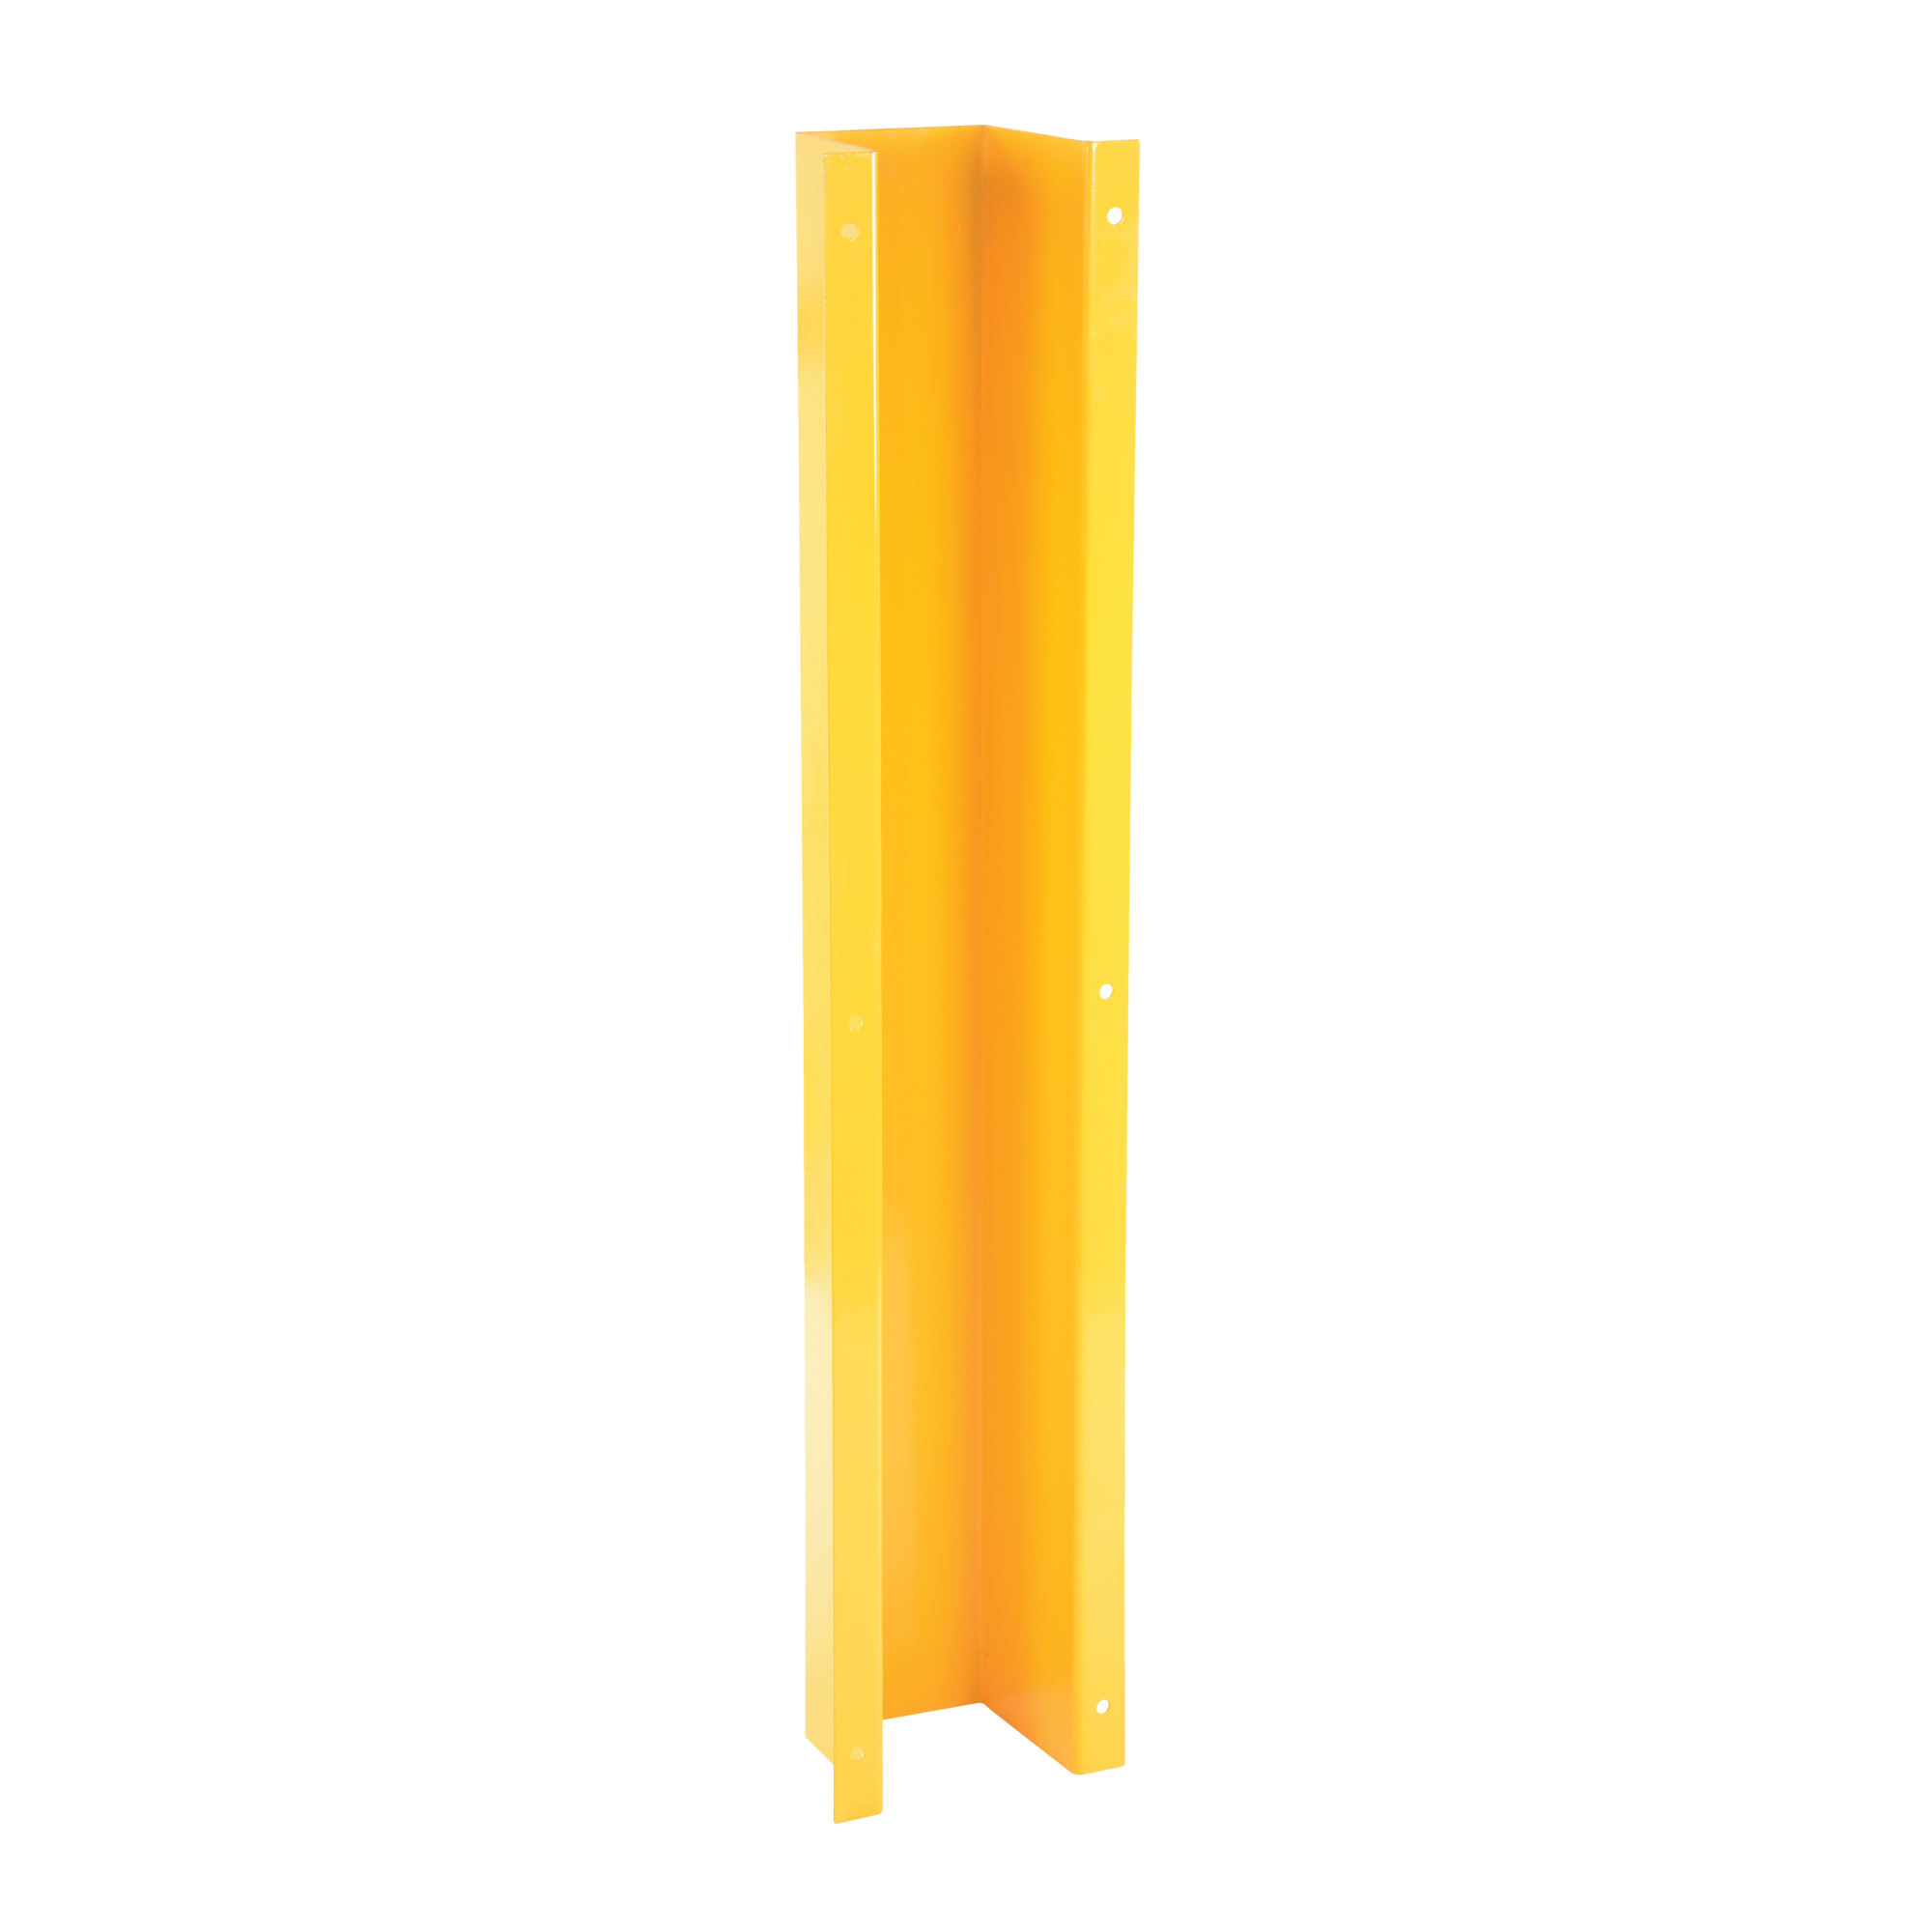 Vestil, Steel pipe and downspout protector, Color Yellow, Max. Width 9.19 in, Material Steel, Model DSG-48